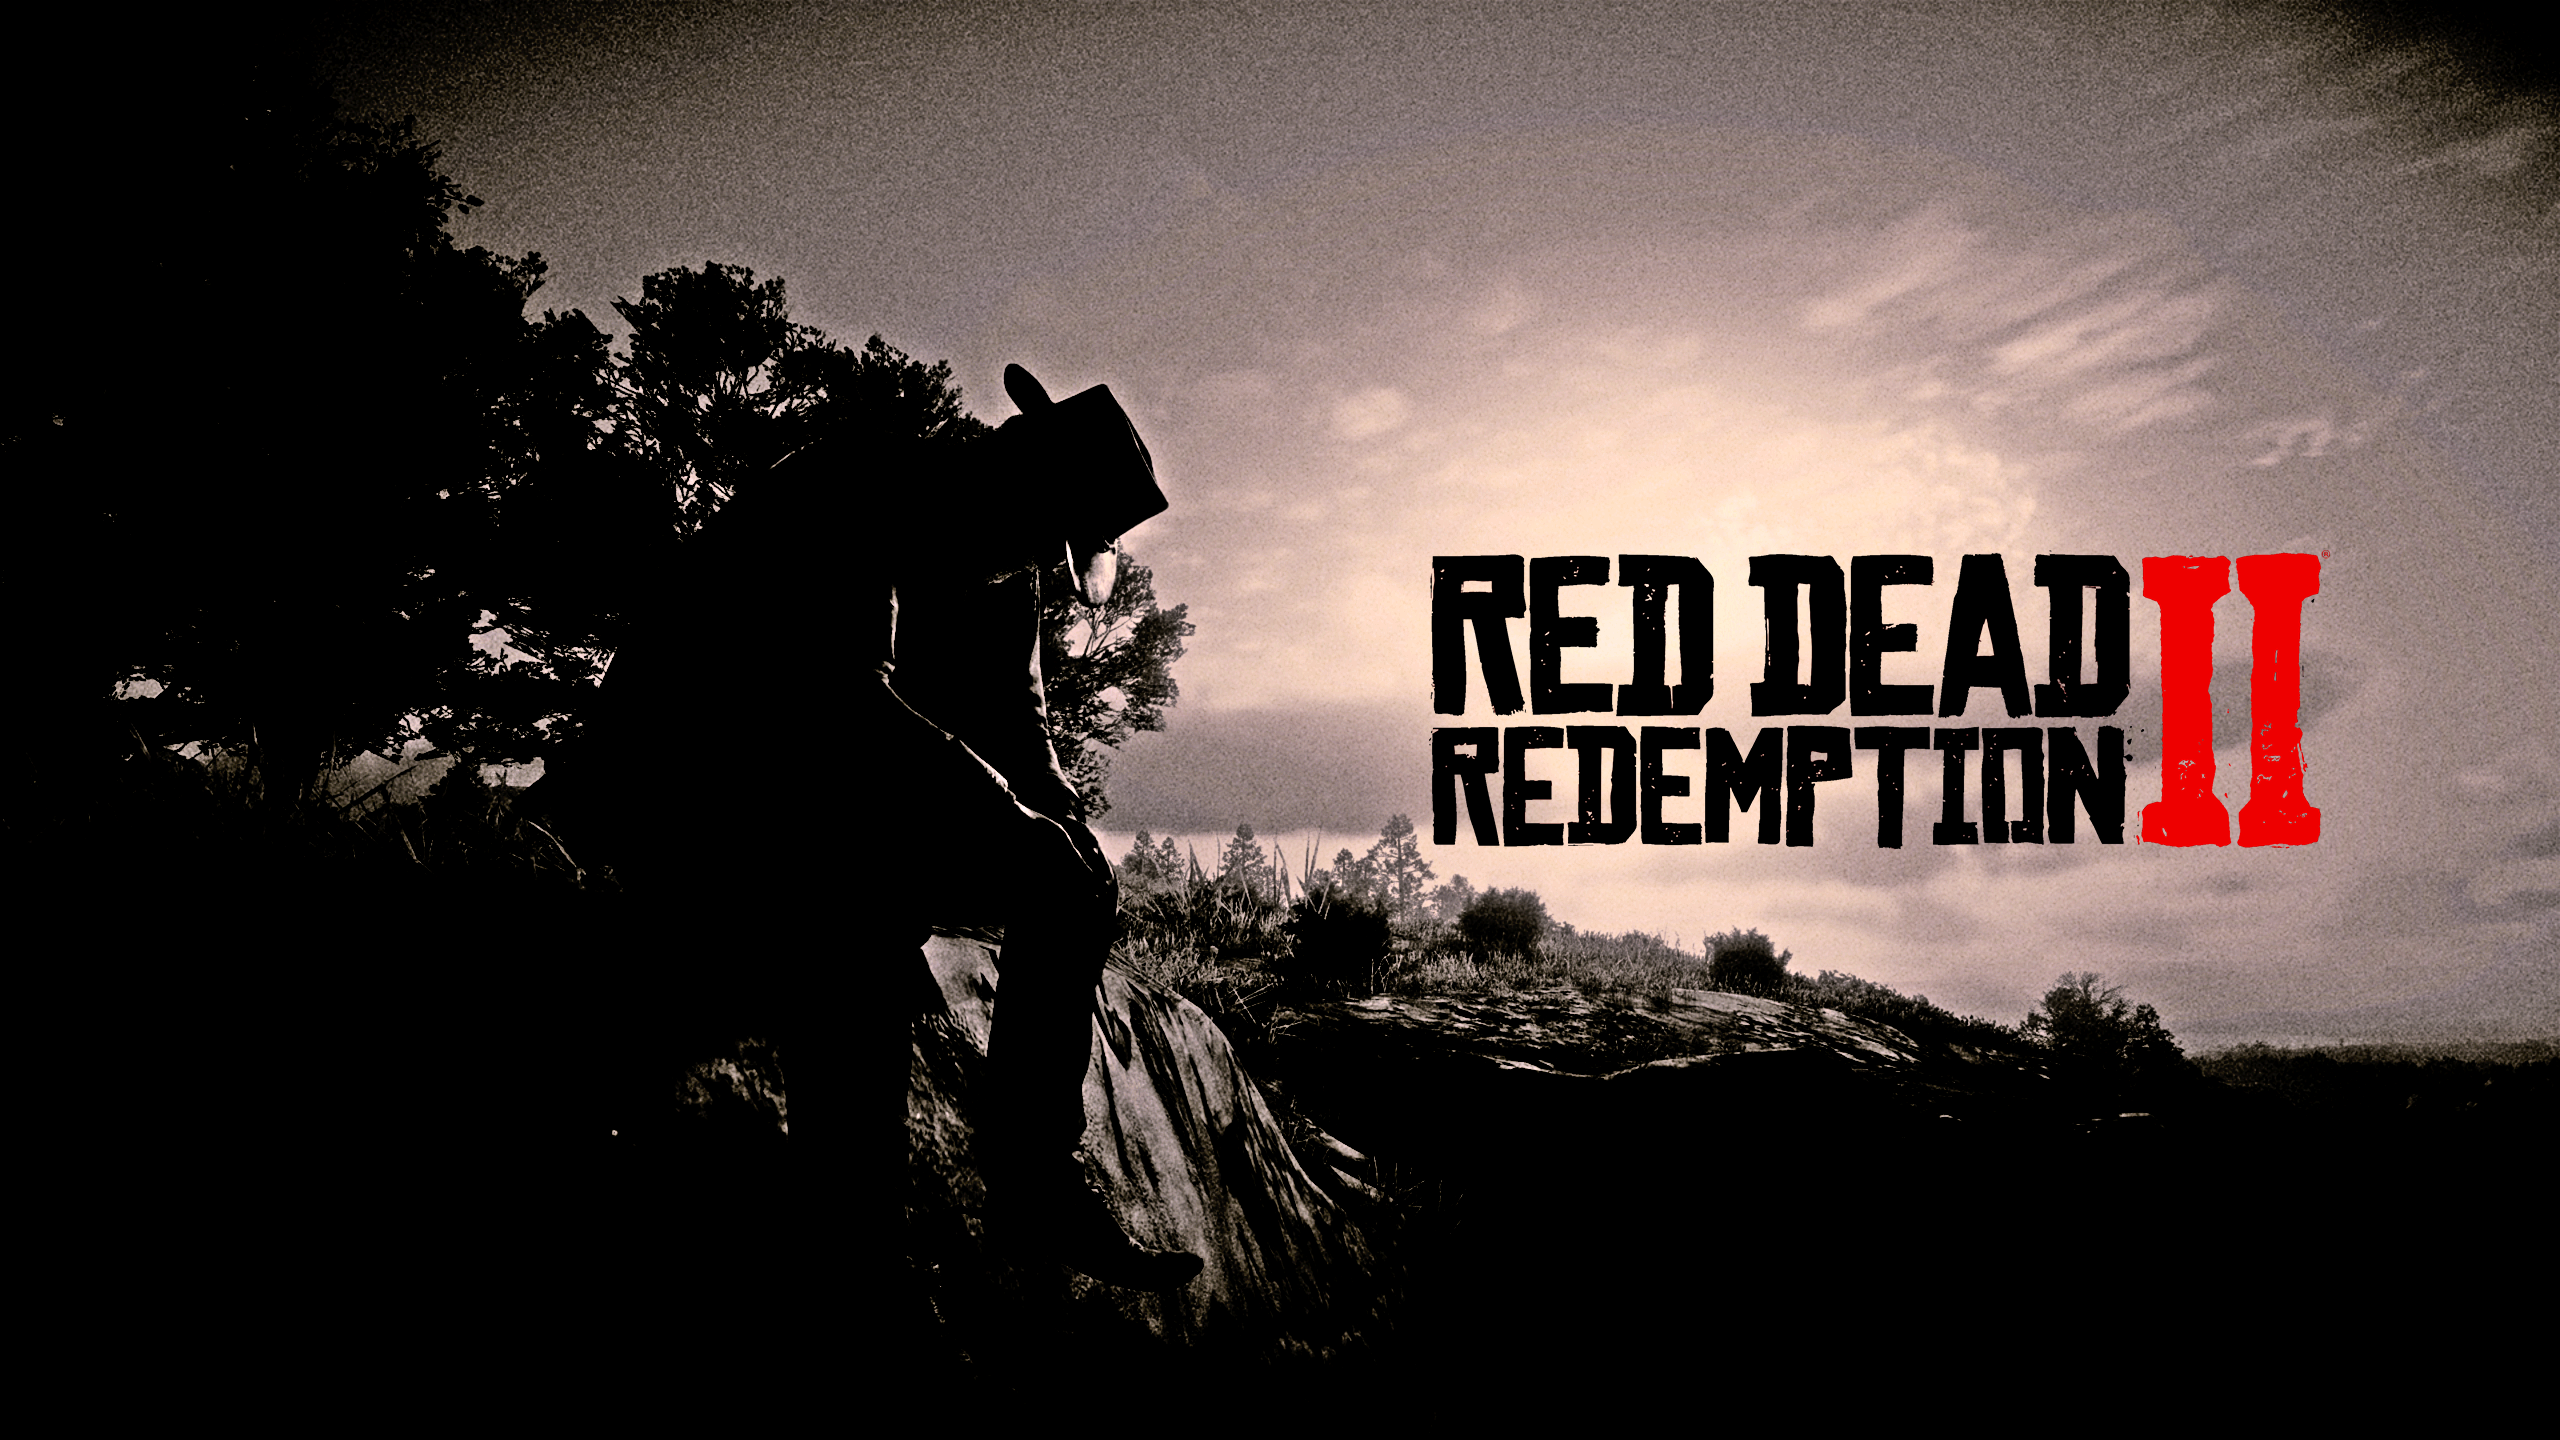 Red Dead Redemption Red Dead Redemption 2 Rockstar Games Cowboy Video Game Characters CGi Video Game 2560x1440